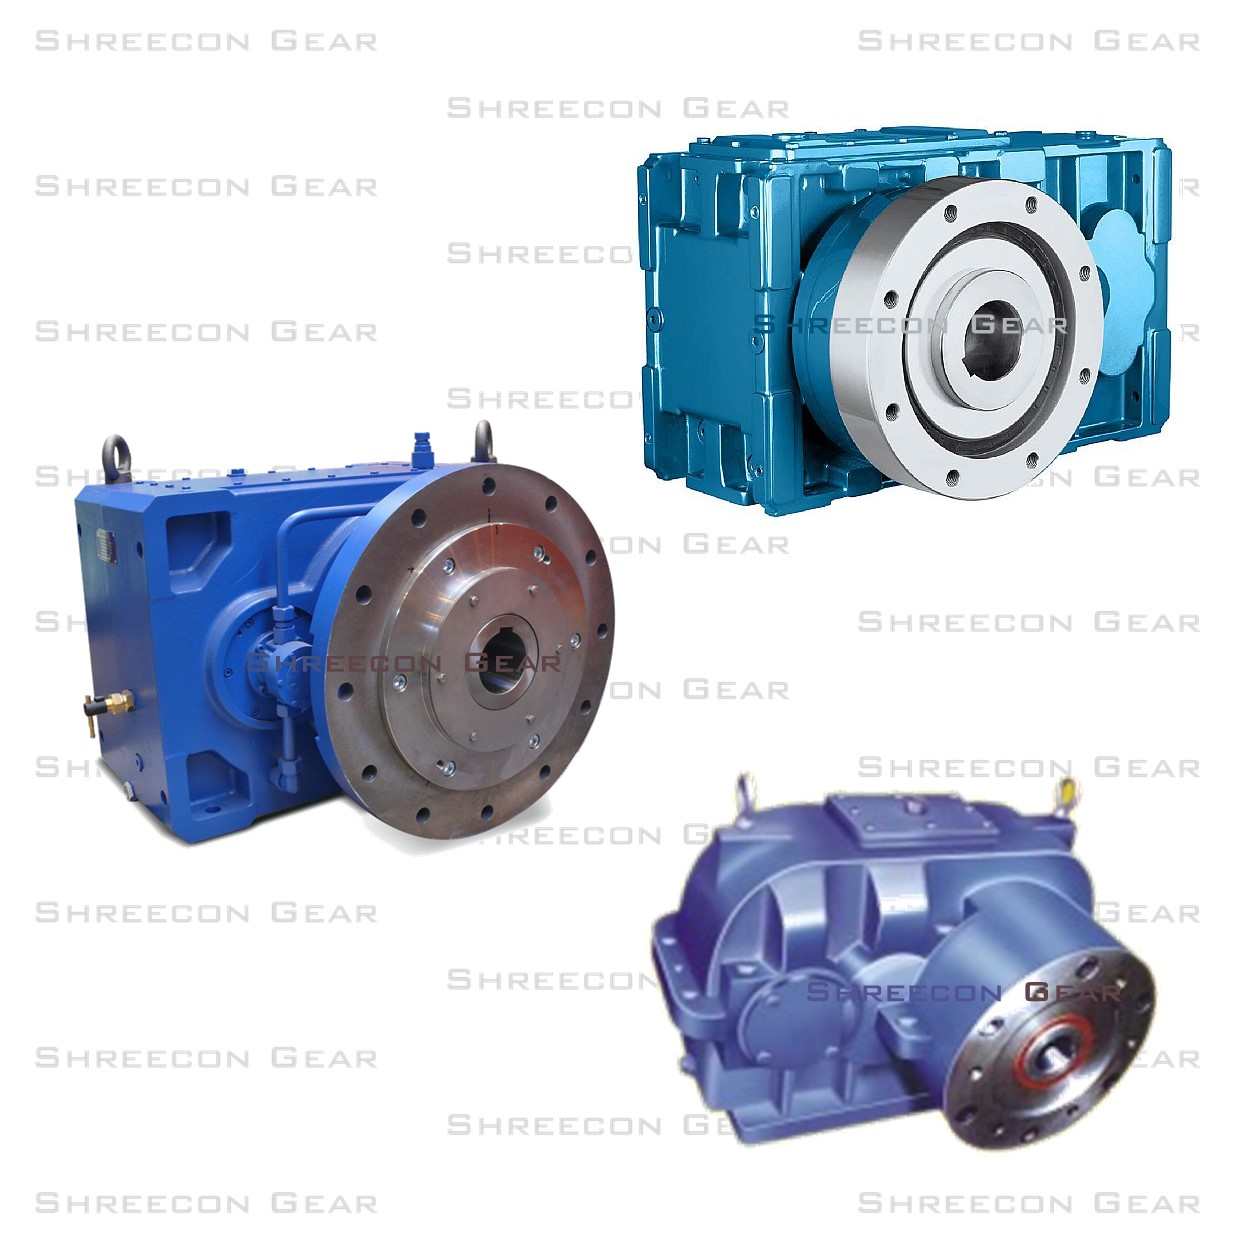 Shreecon Gear - Extruder Helical Gearbox